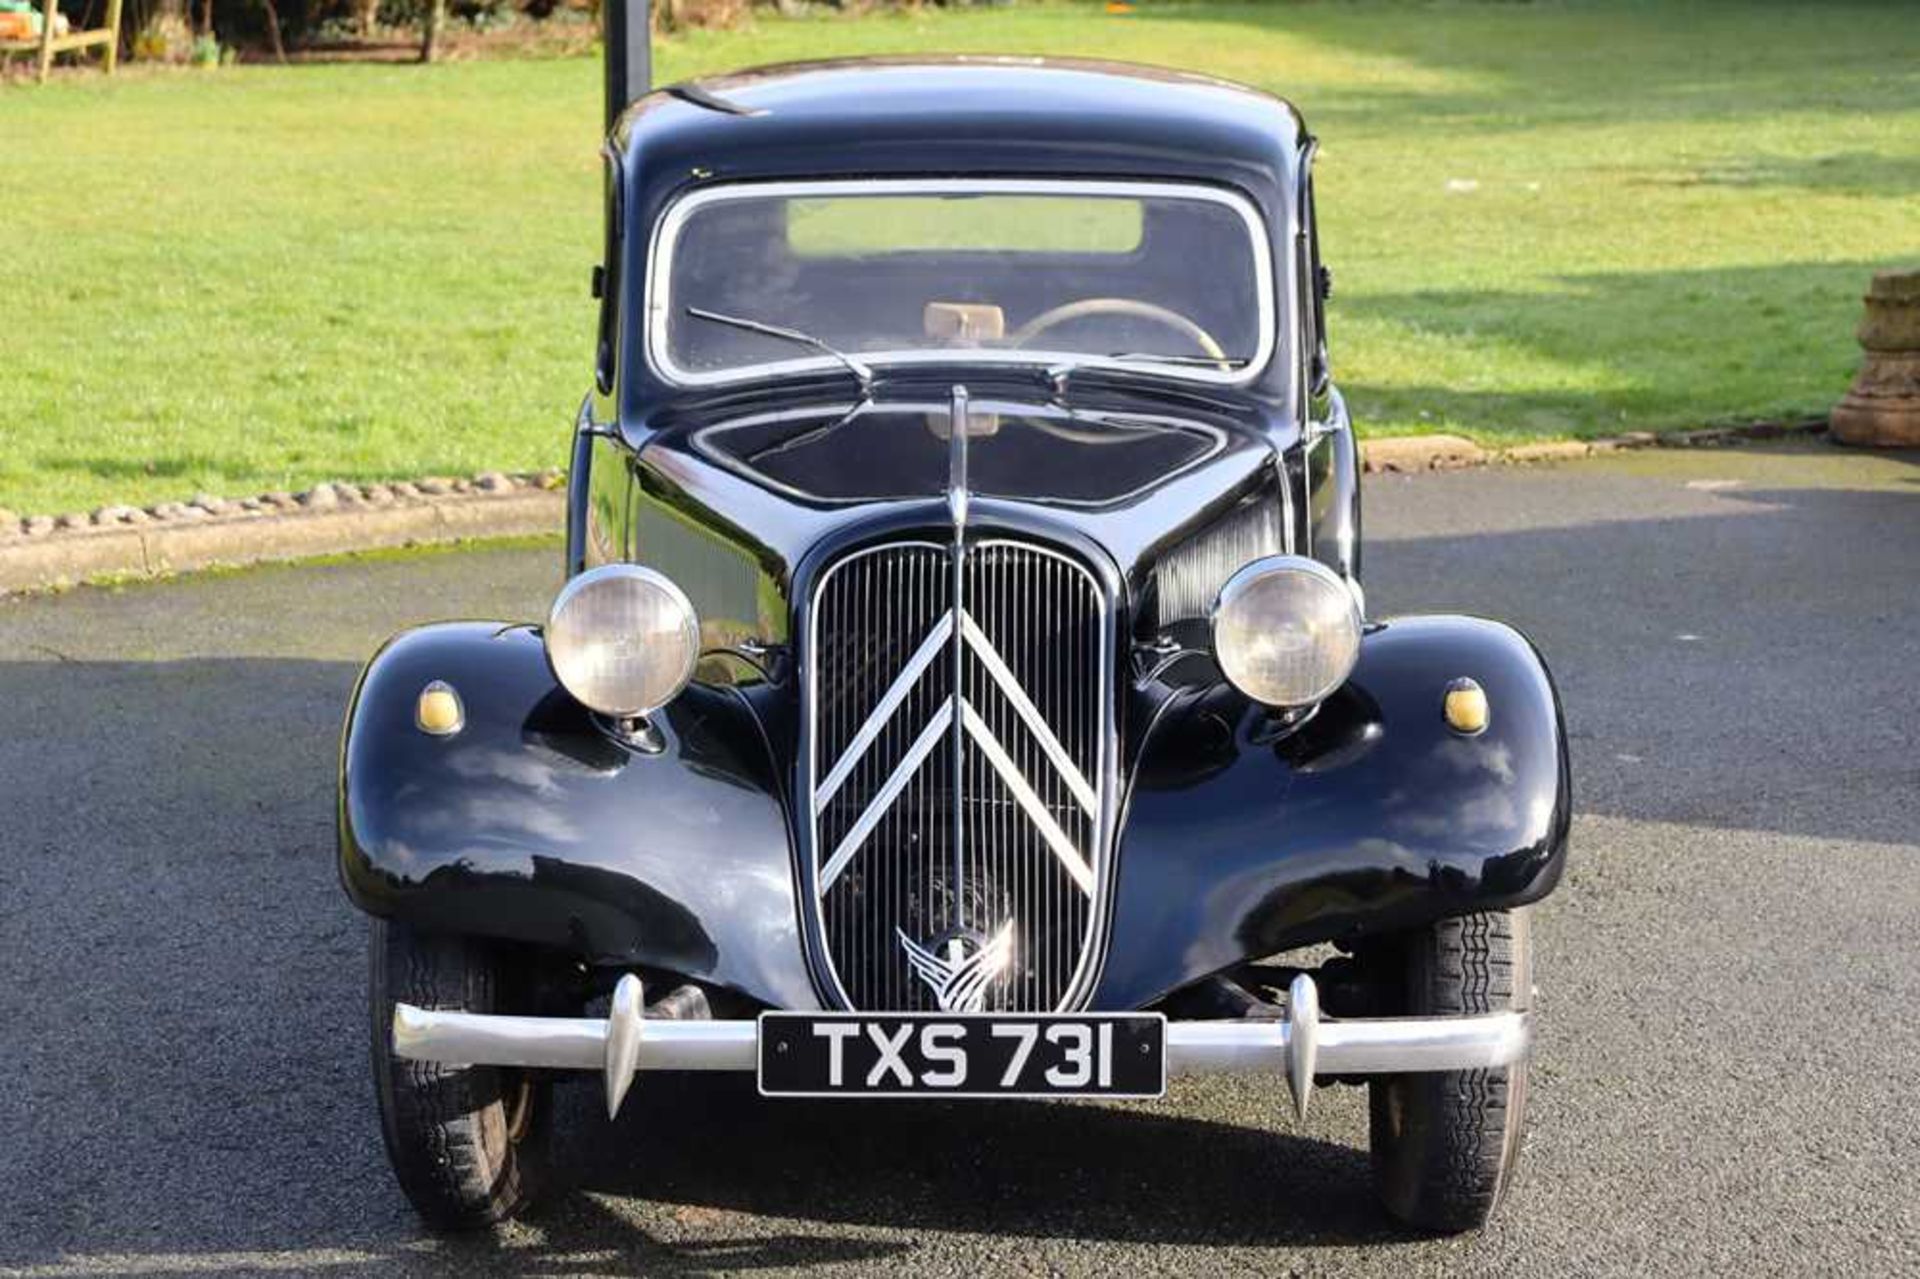 1952 Citroën 11BL Traction Avant In current ownership for over 40 years - Image 6 of 60